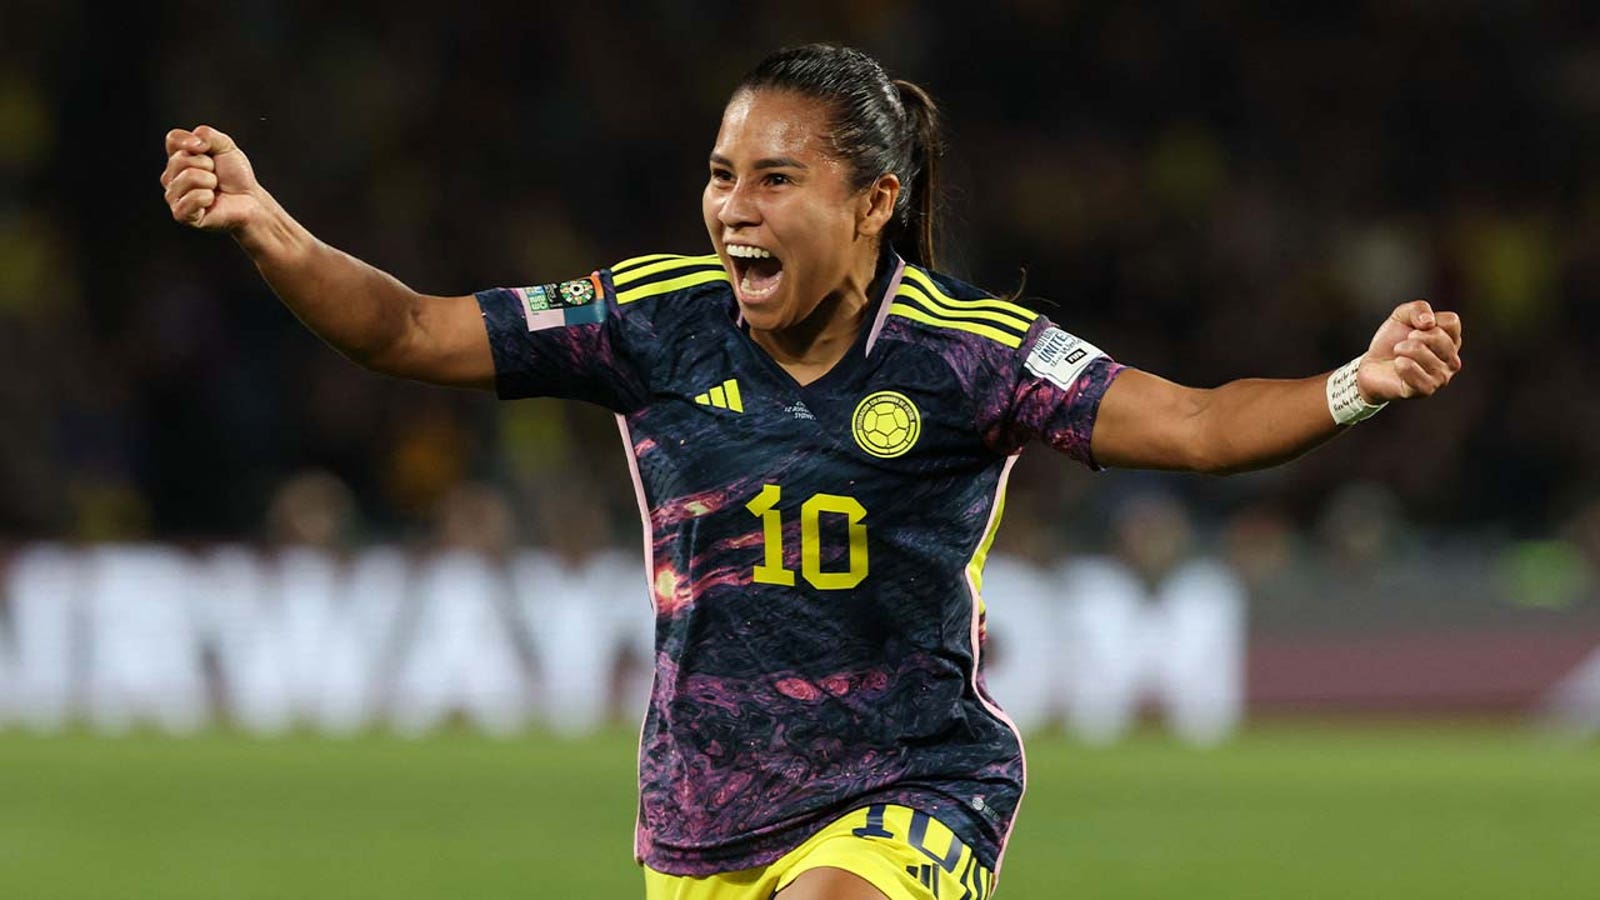 Colombia's Leicy Santos scores goal vs. England in 44'